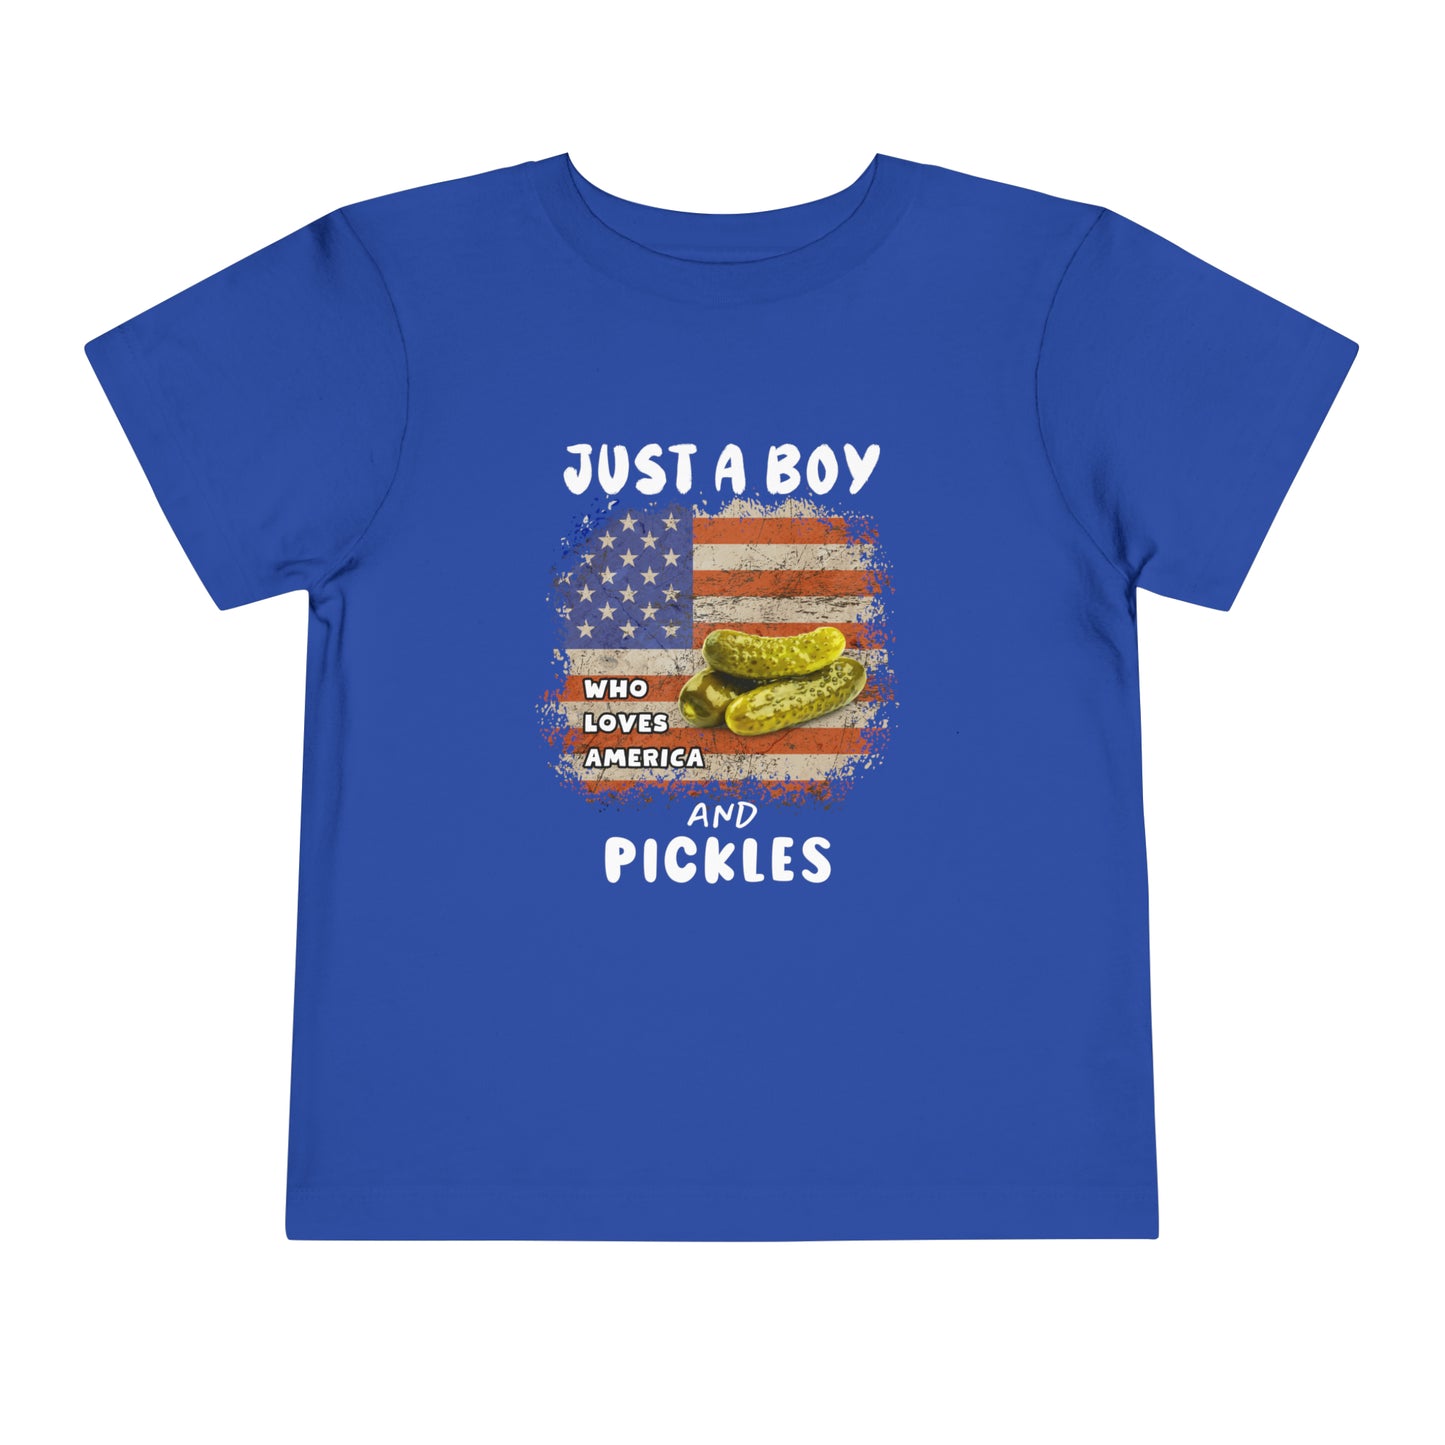 Just a Boy Who Loves America and Pickles - Toddler Short Sleeve Tee